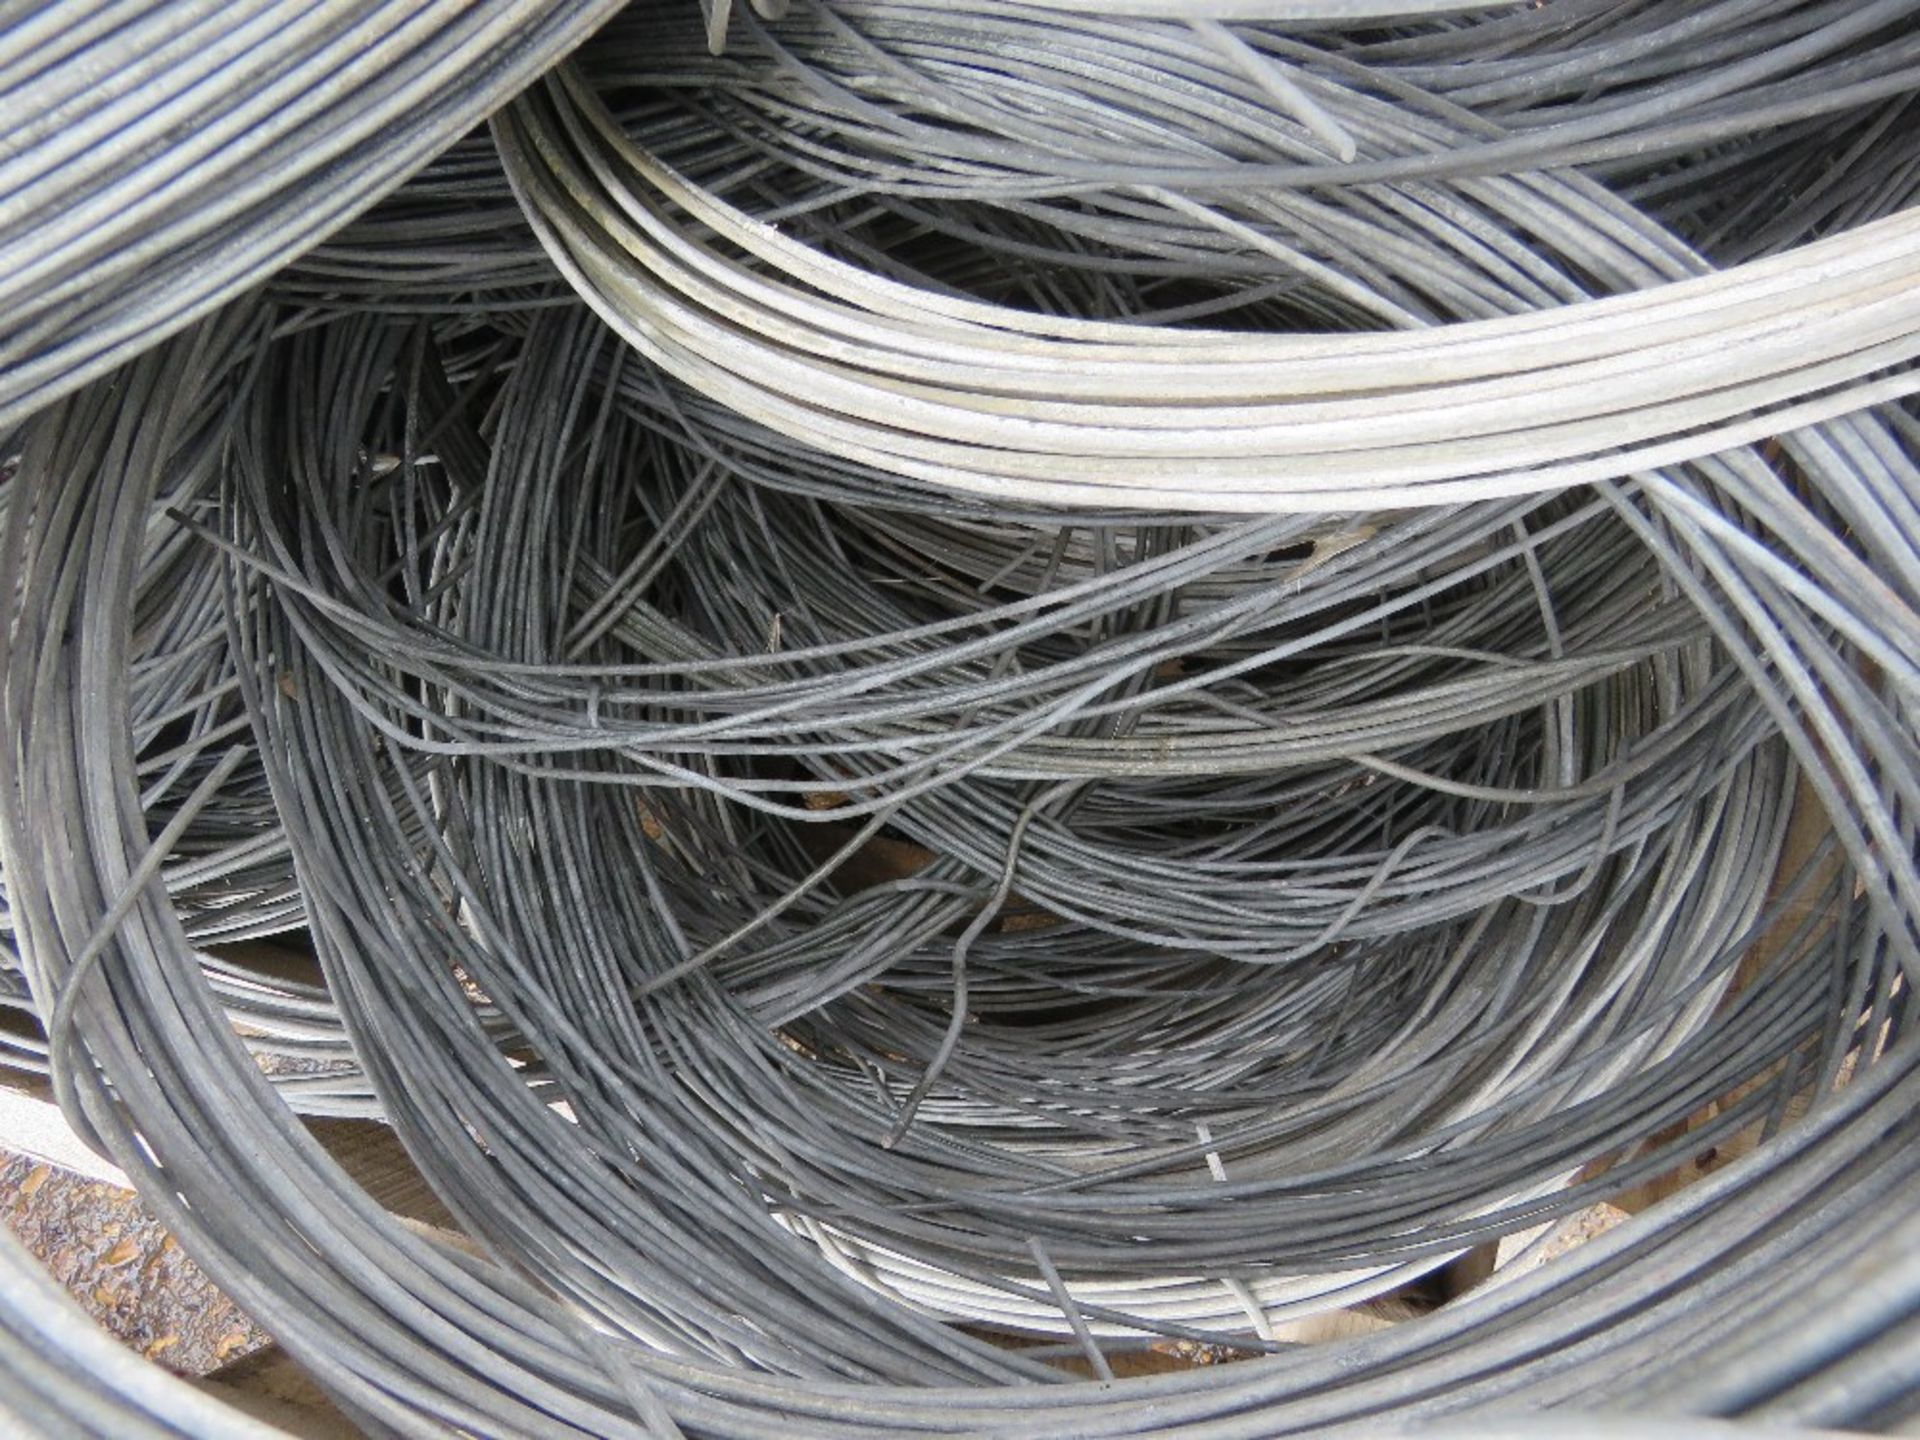 ASSORTED GALVANISED FENCING WIRE 2.5/3.5MM. - Image 6 of 6